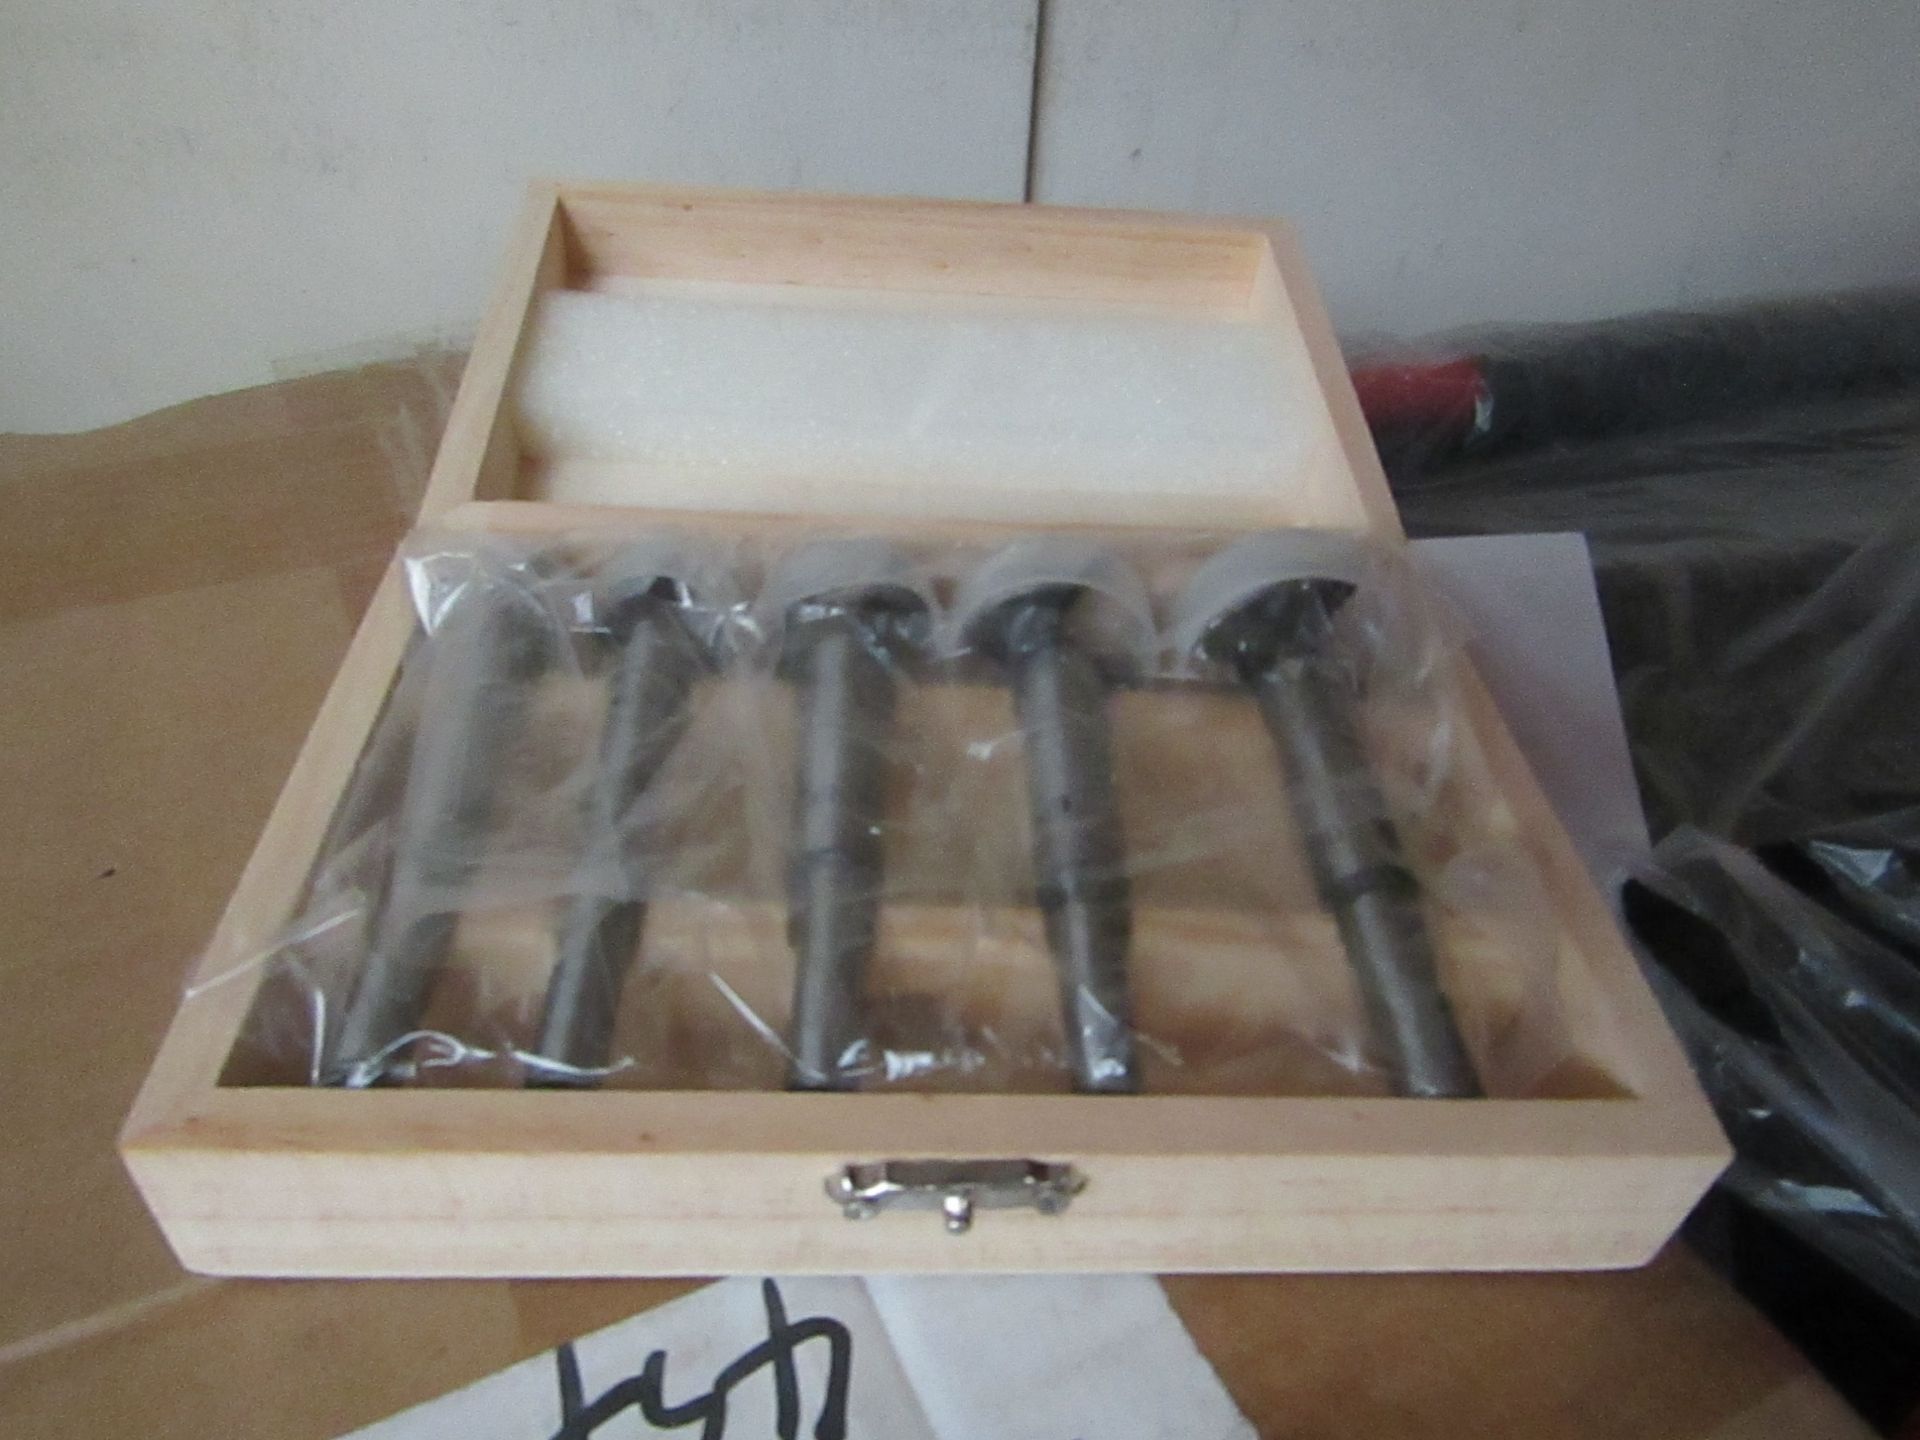 5 piece Router Nit set in wood carry case, unused